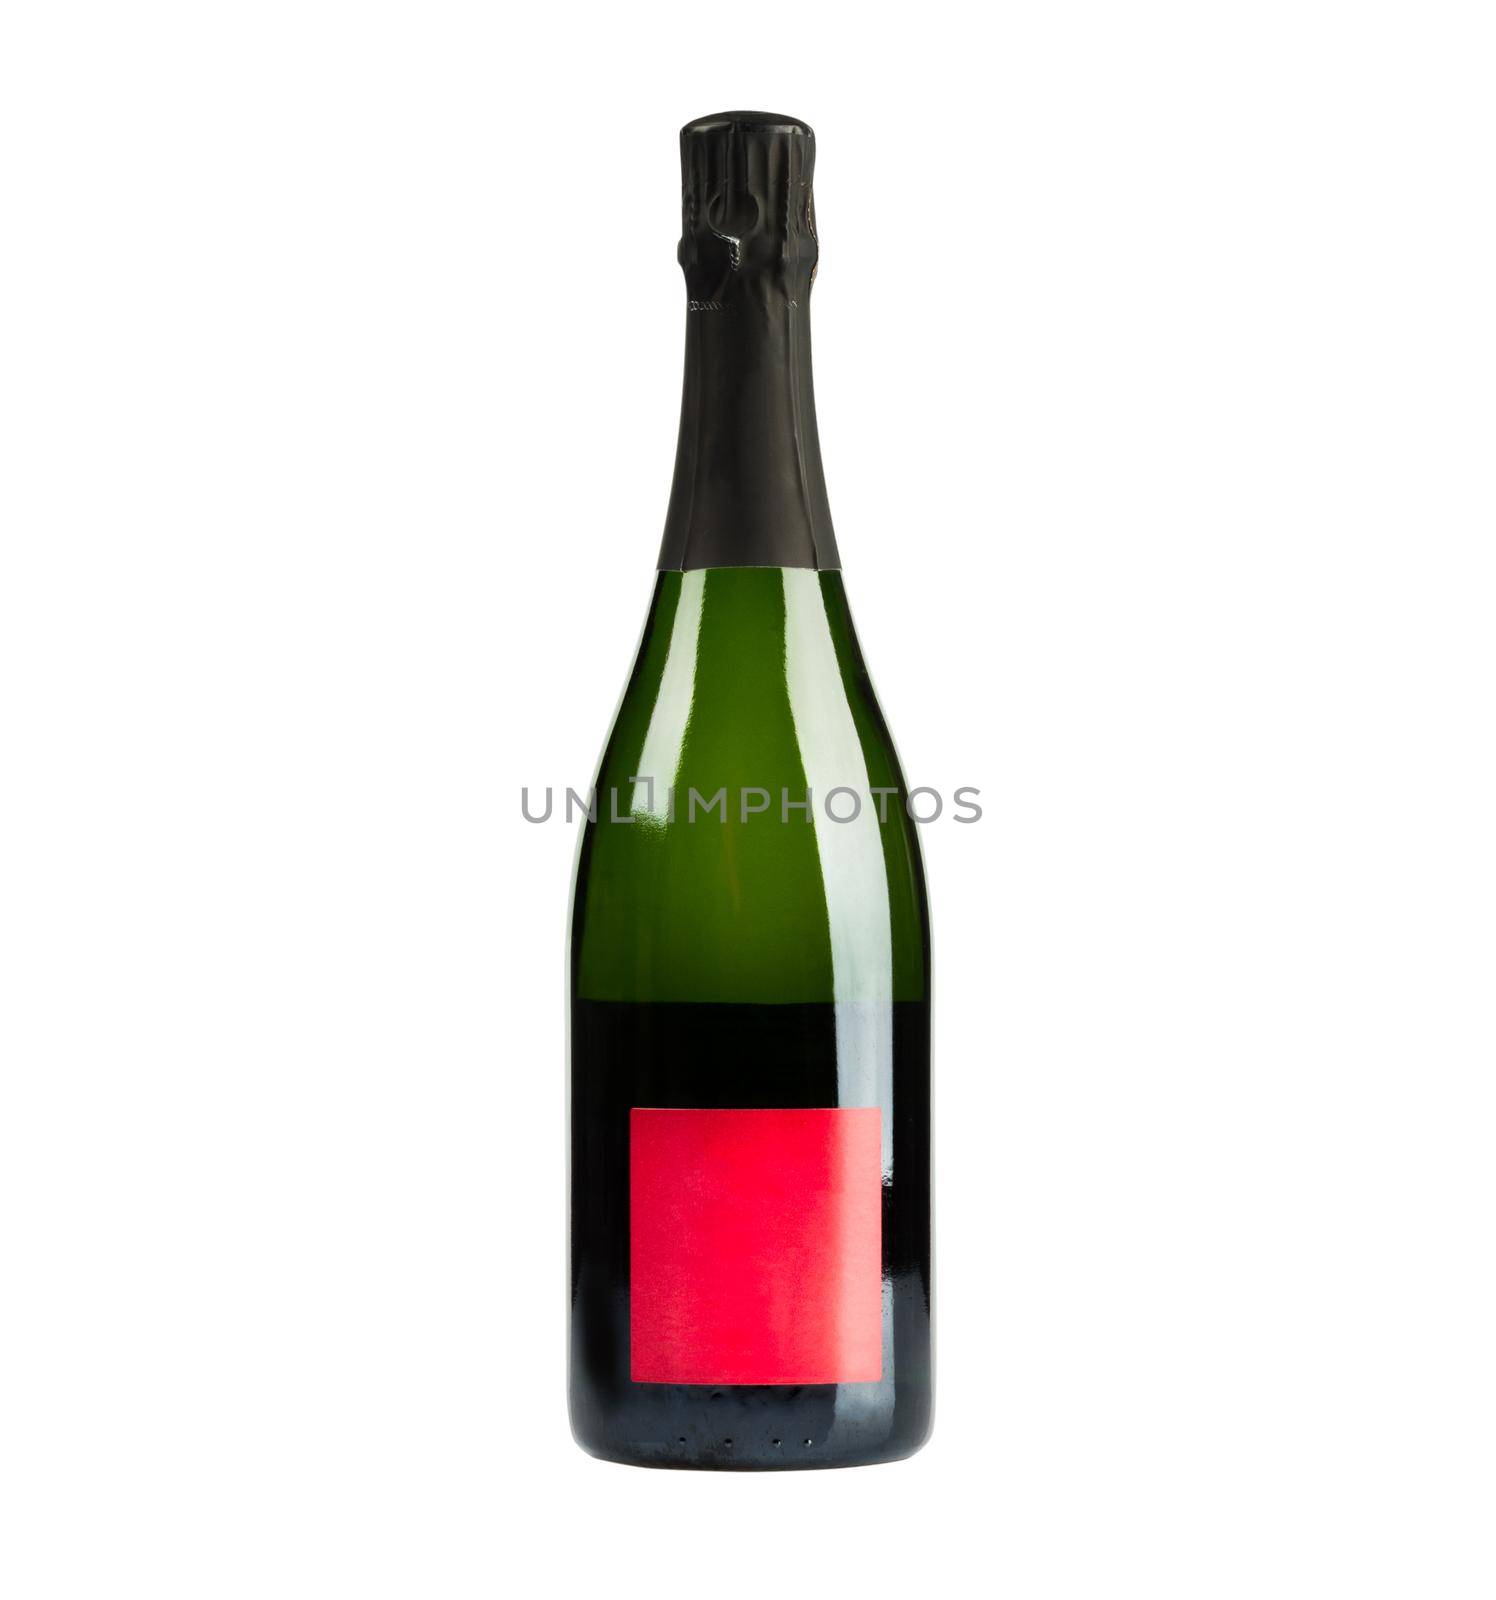 Champagne bottle with red lable by nikitabuida